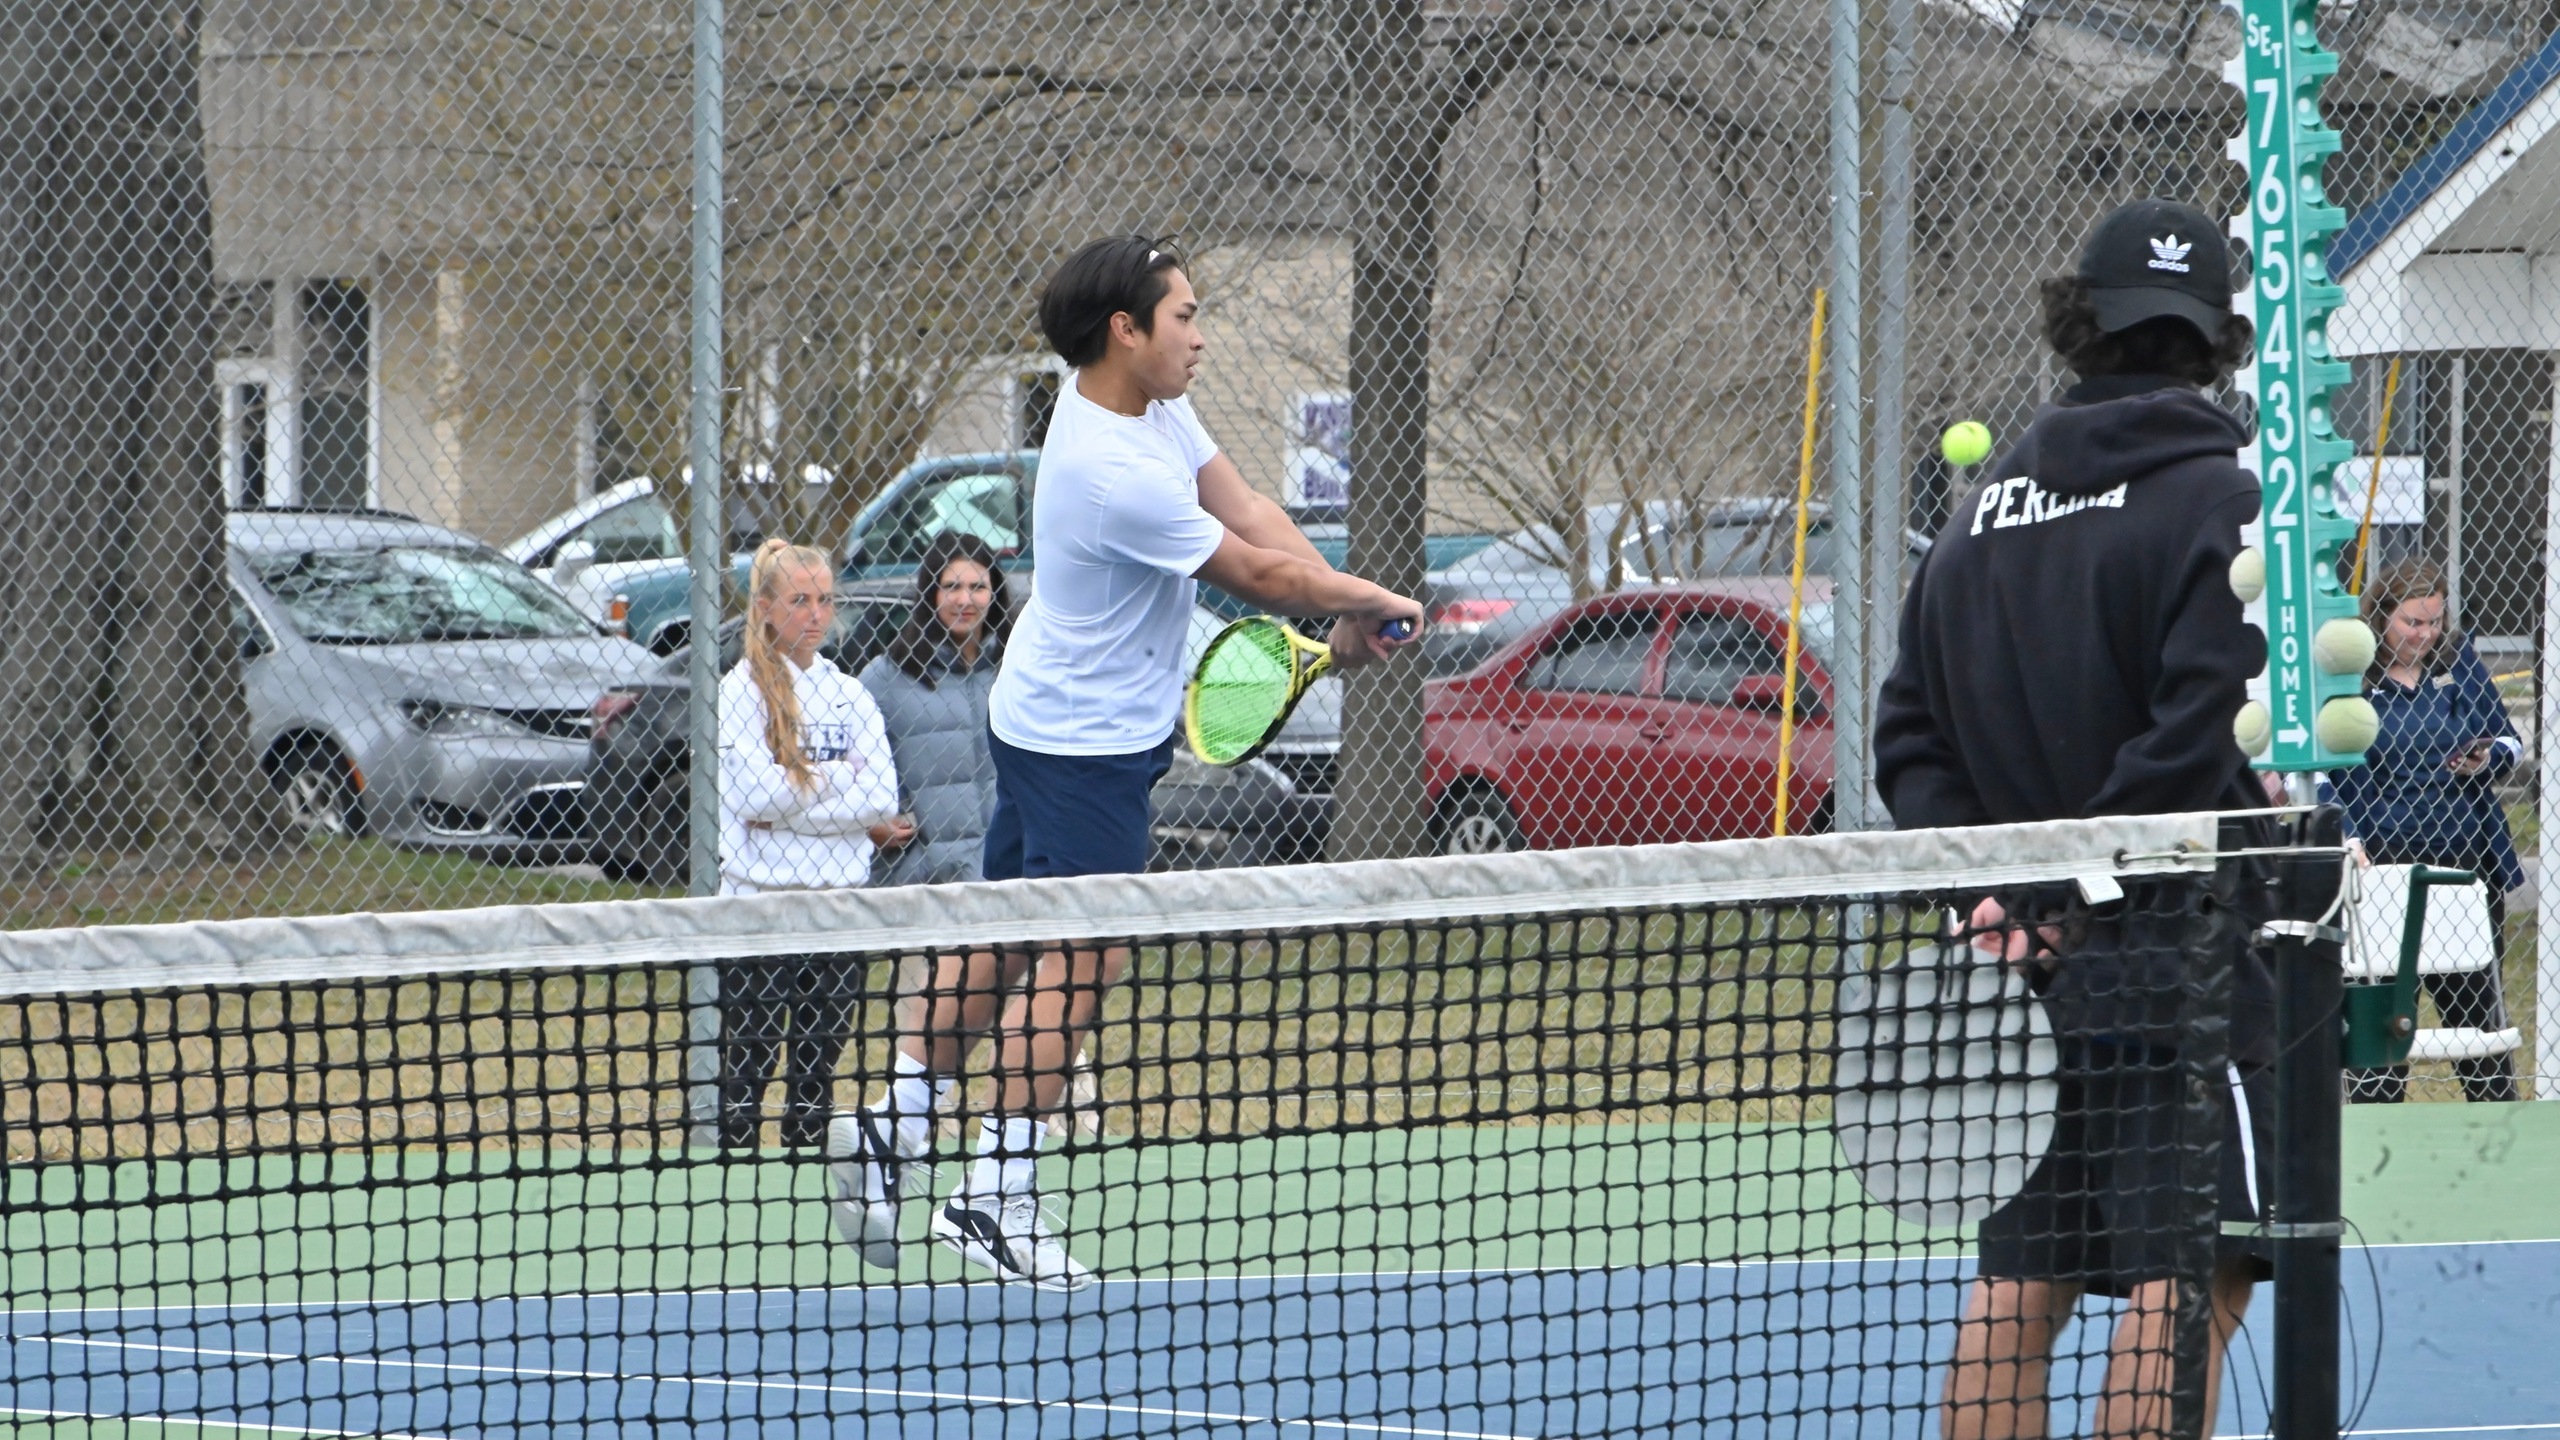 Men’s Tennis Took on Newberry at Home